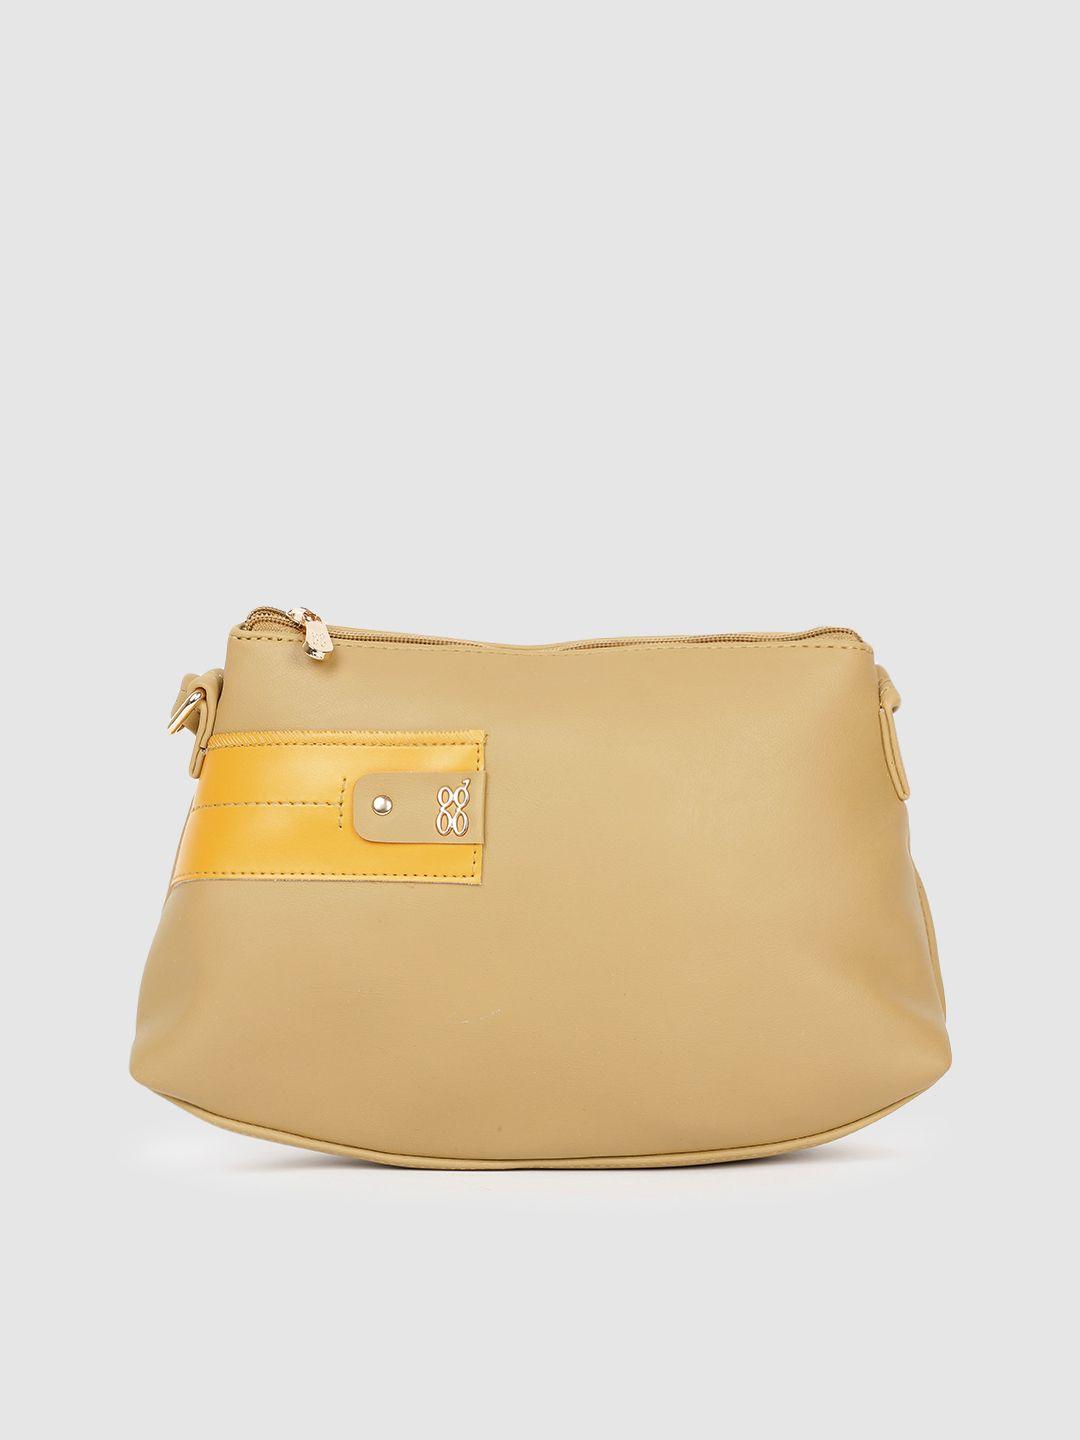 baggit yellow structured sling bag